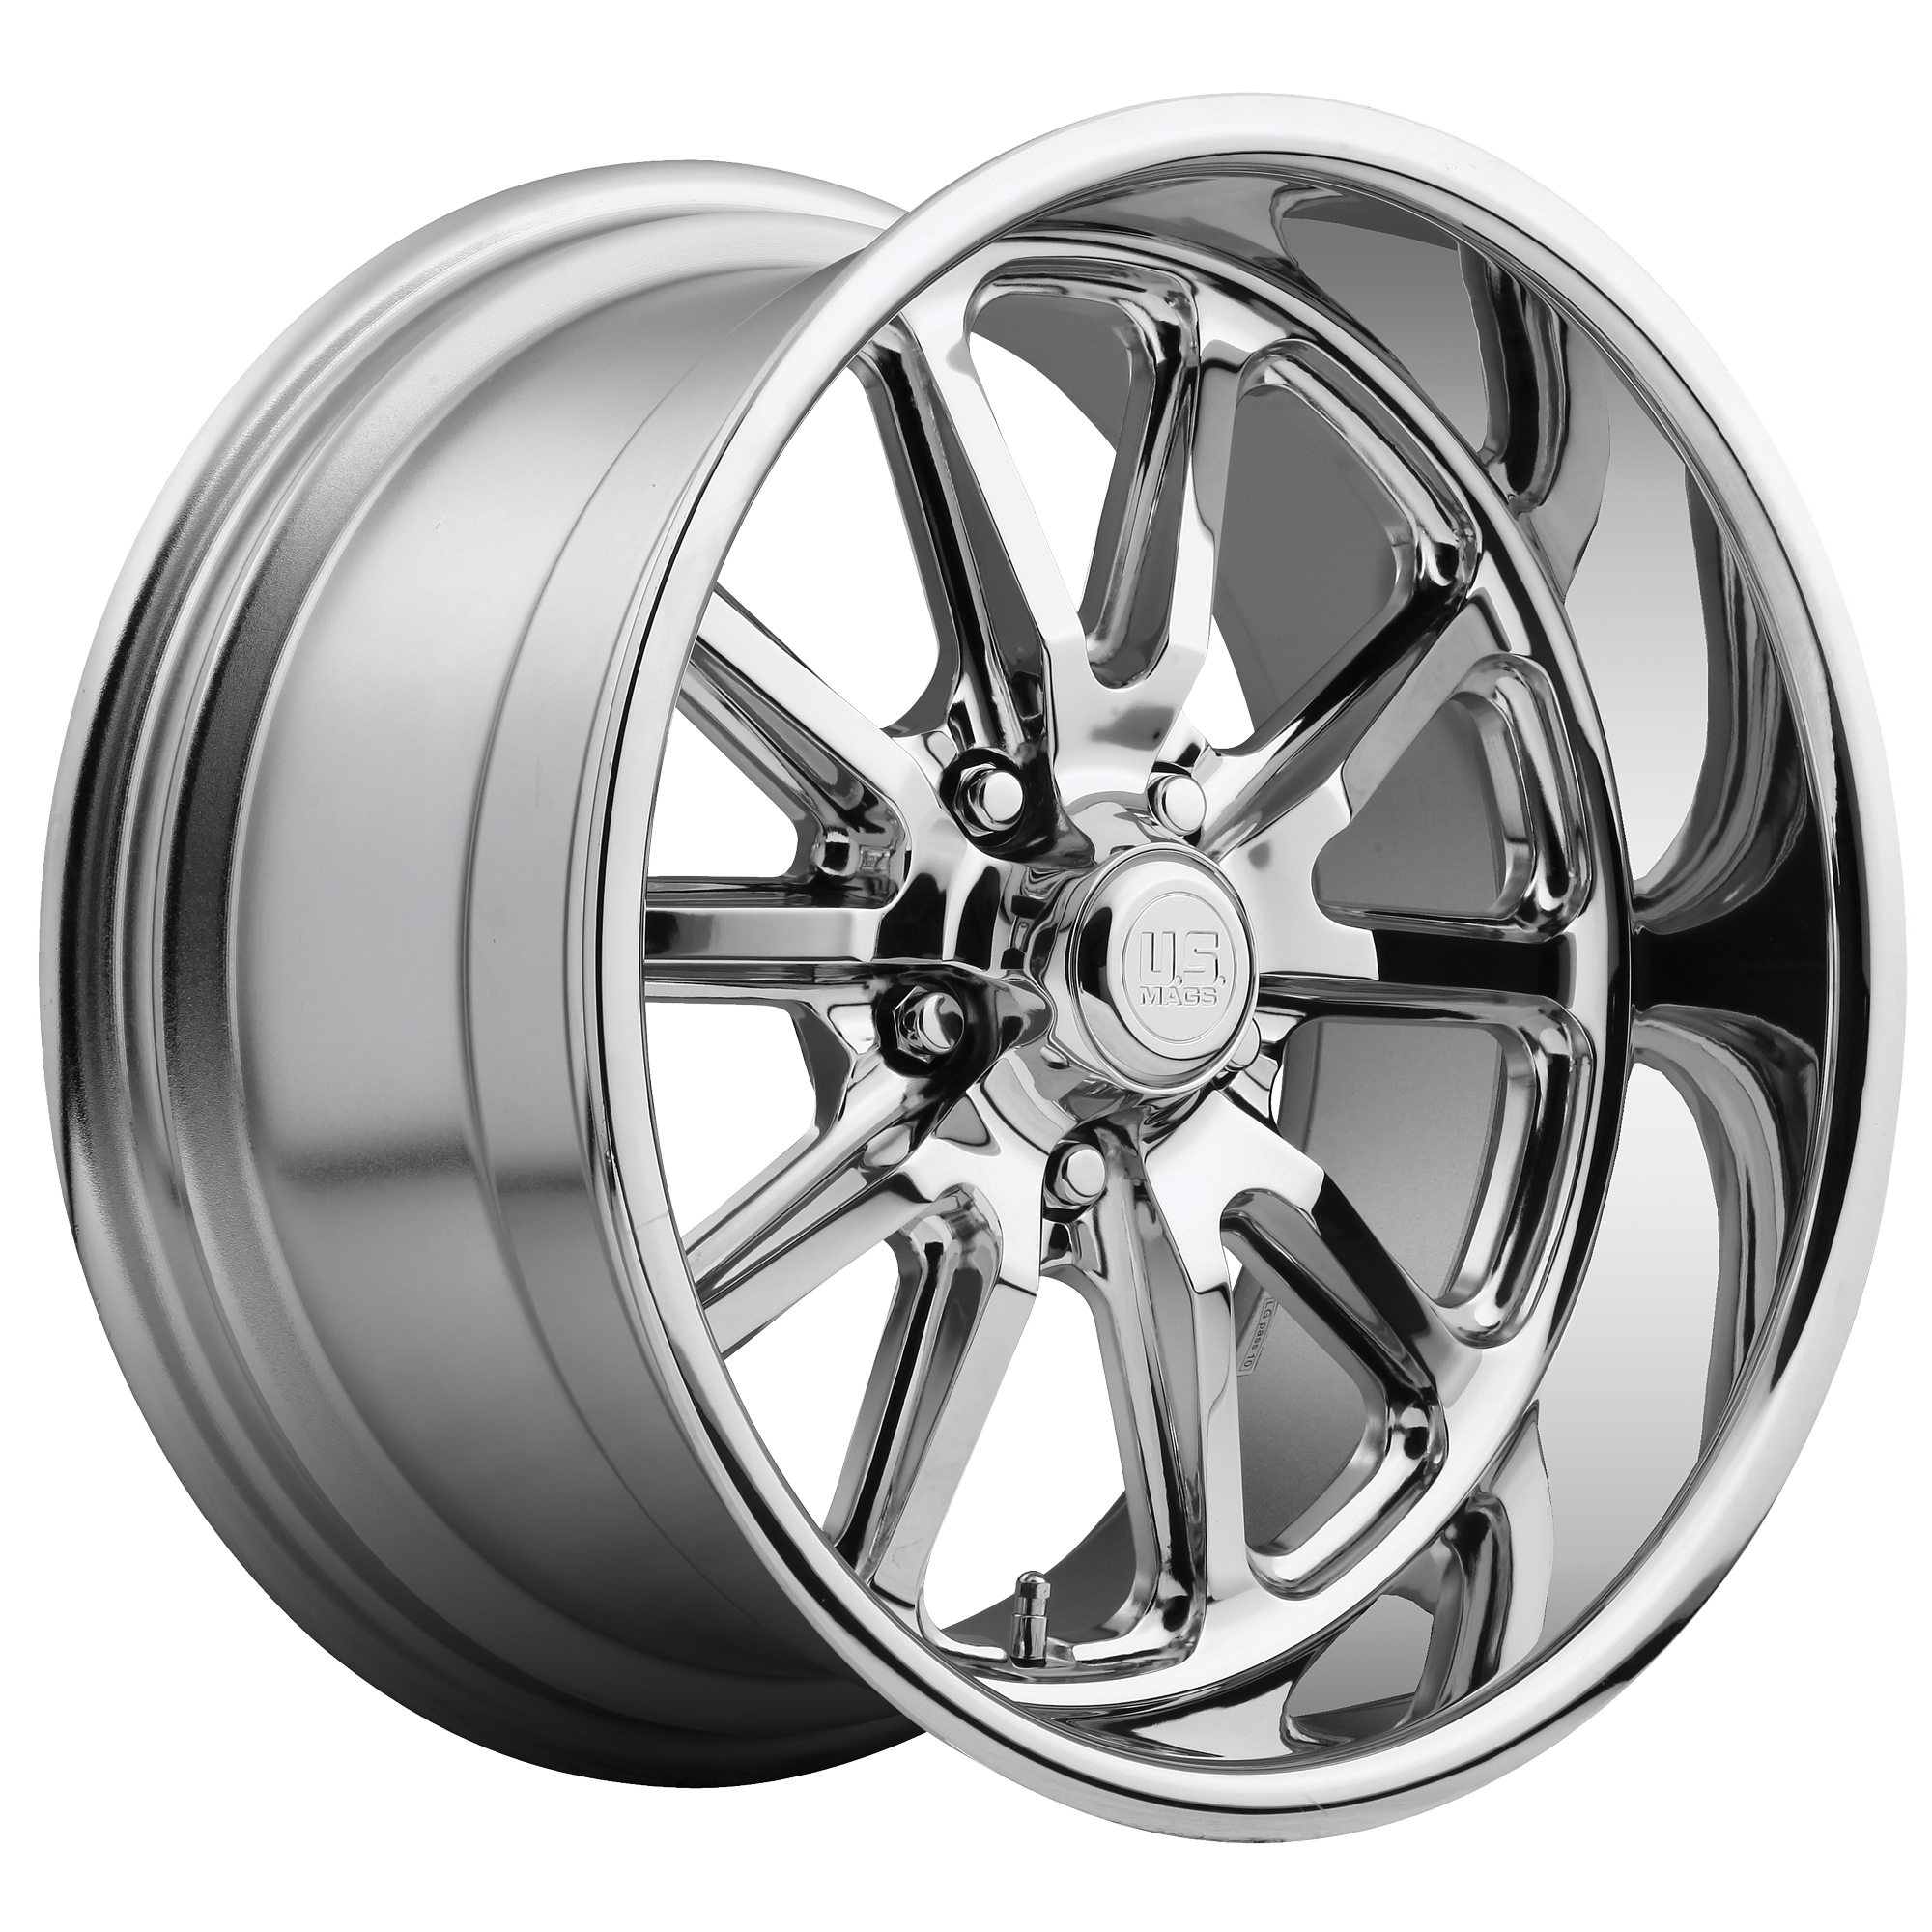 RAMBLER 18x9.5 5x120.65 CHROME PLATED (1 mm) - Tires and Engine Performance